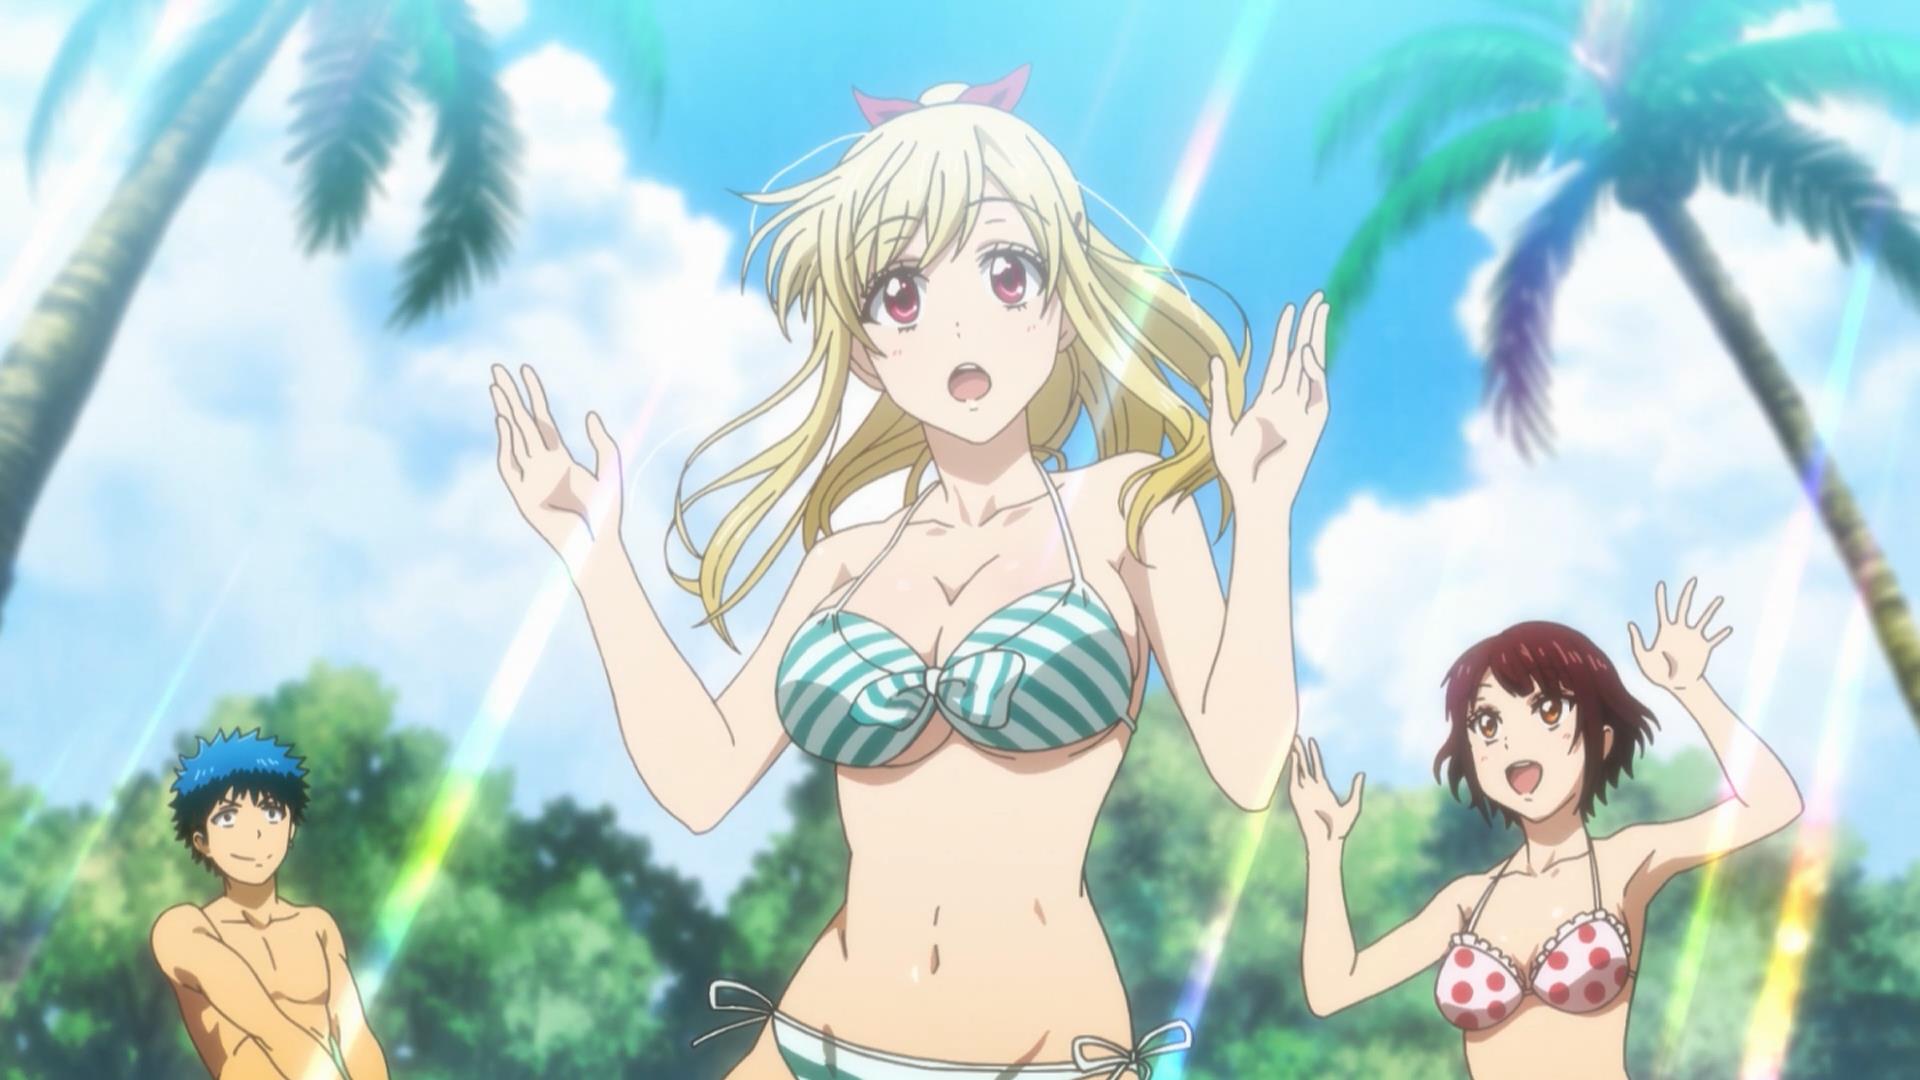 [HorribleSubs] Yamada-kun and the Seven Witches - 06 [1080p].mkv_snapshot_19.50_[2015.05.17_13.59.42]